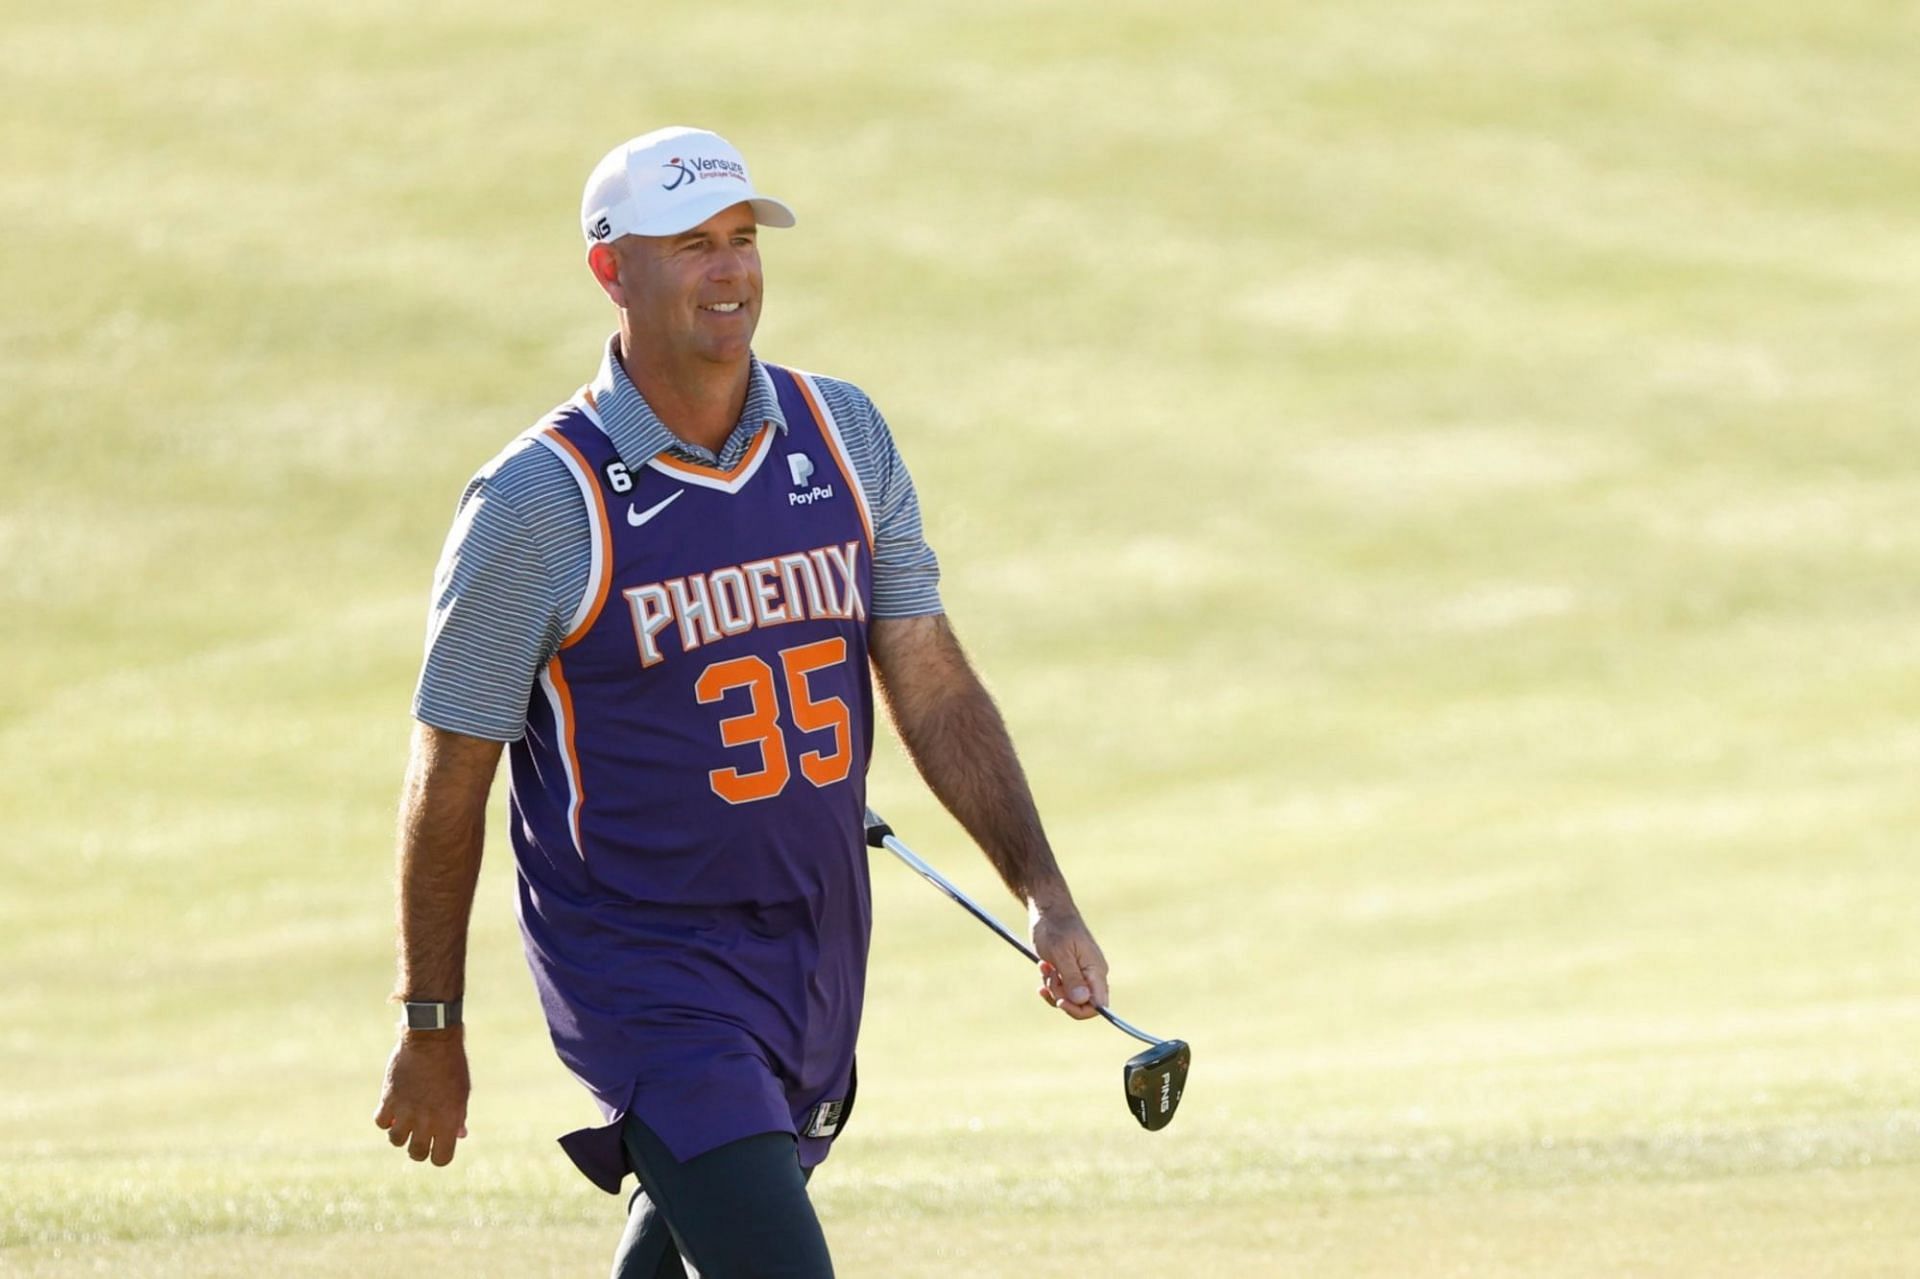 Cink was spotted wearing a Phoenix jersey with the number 35 and the name &quot;Durant&quot; on the back.